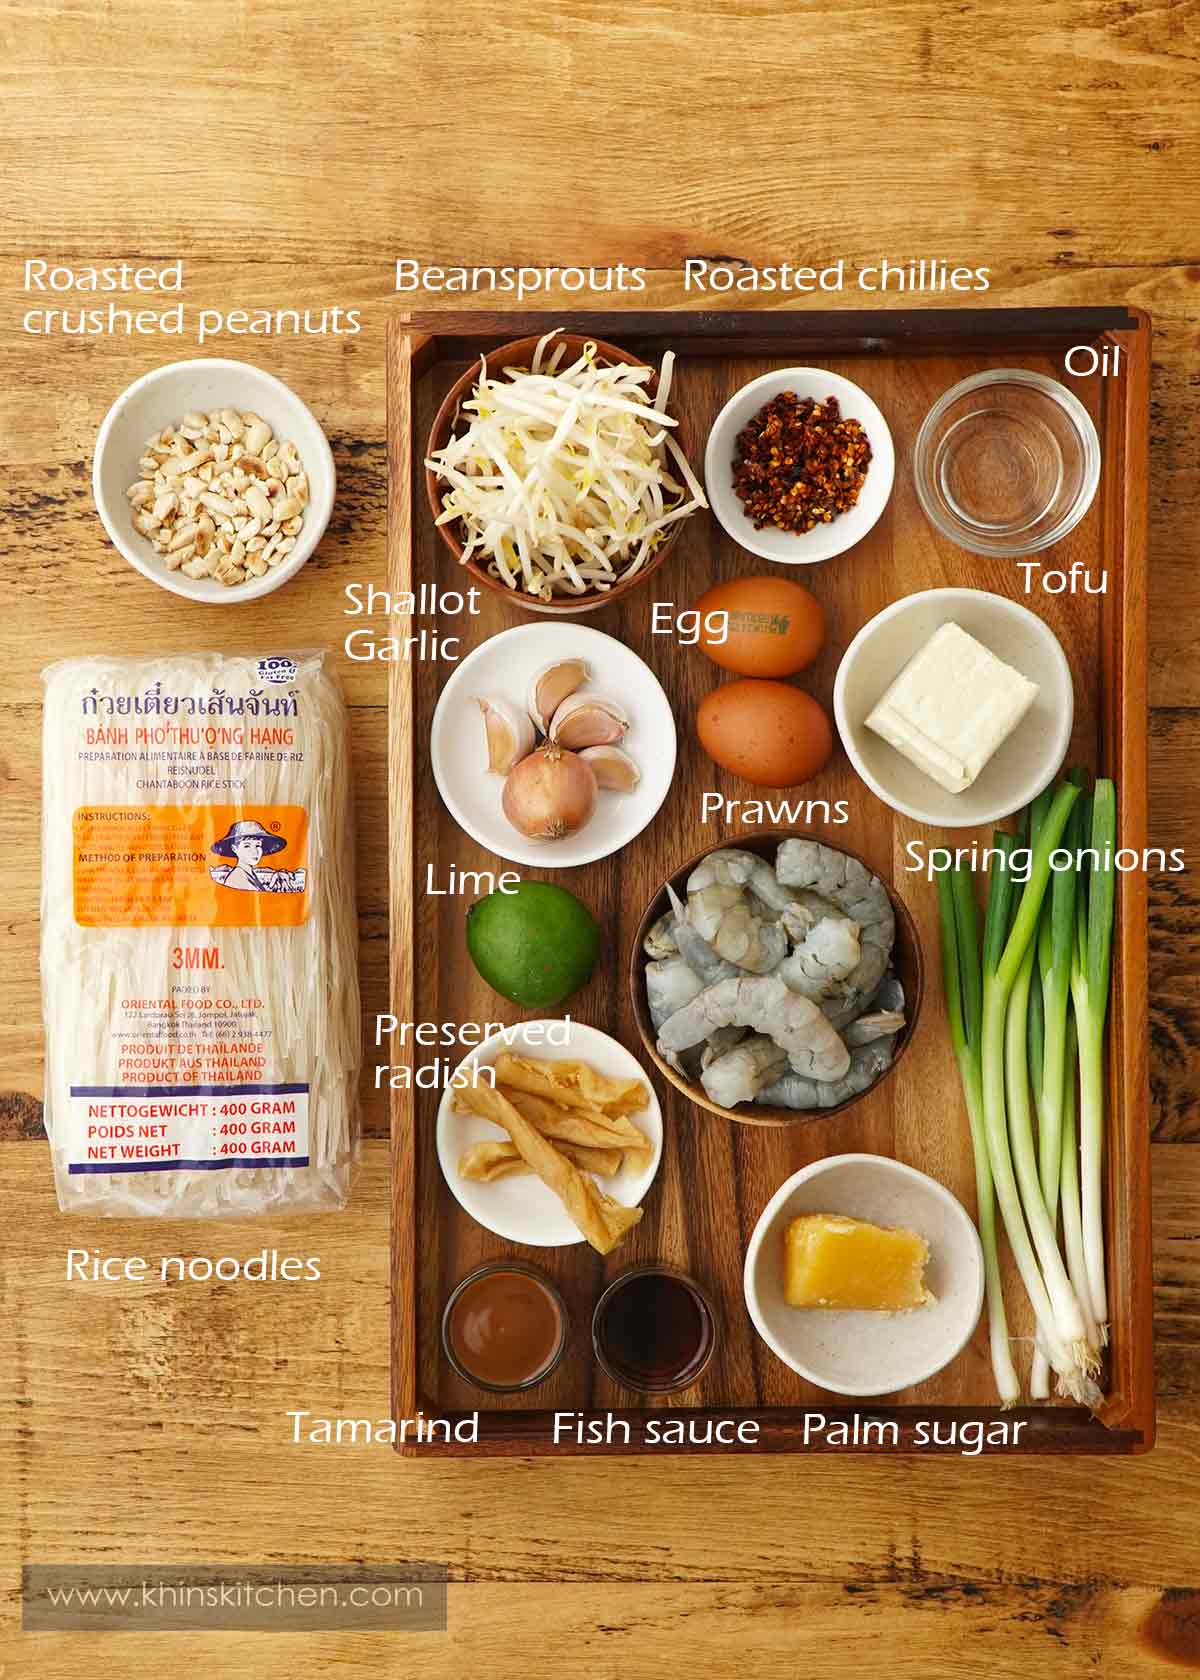 Labelled ingredients displayed on the brown table. 